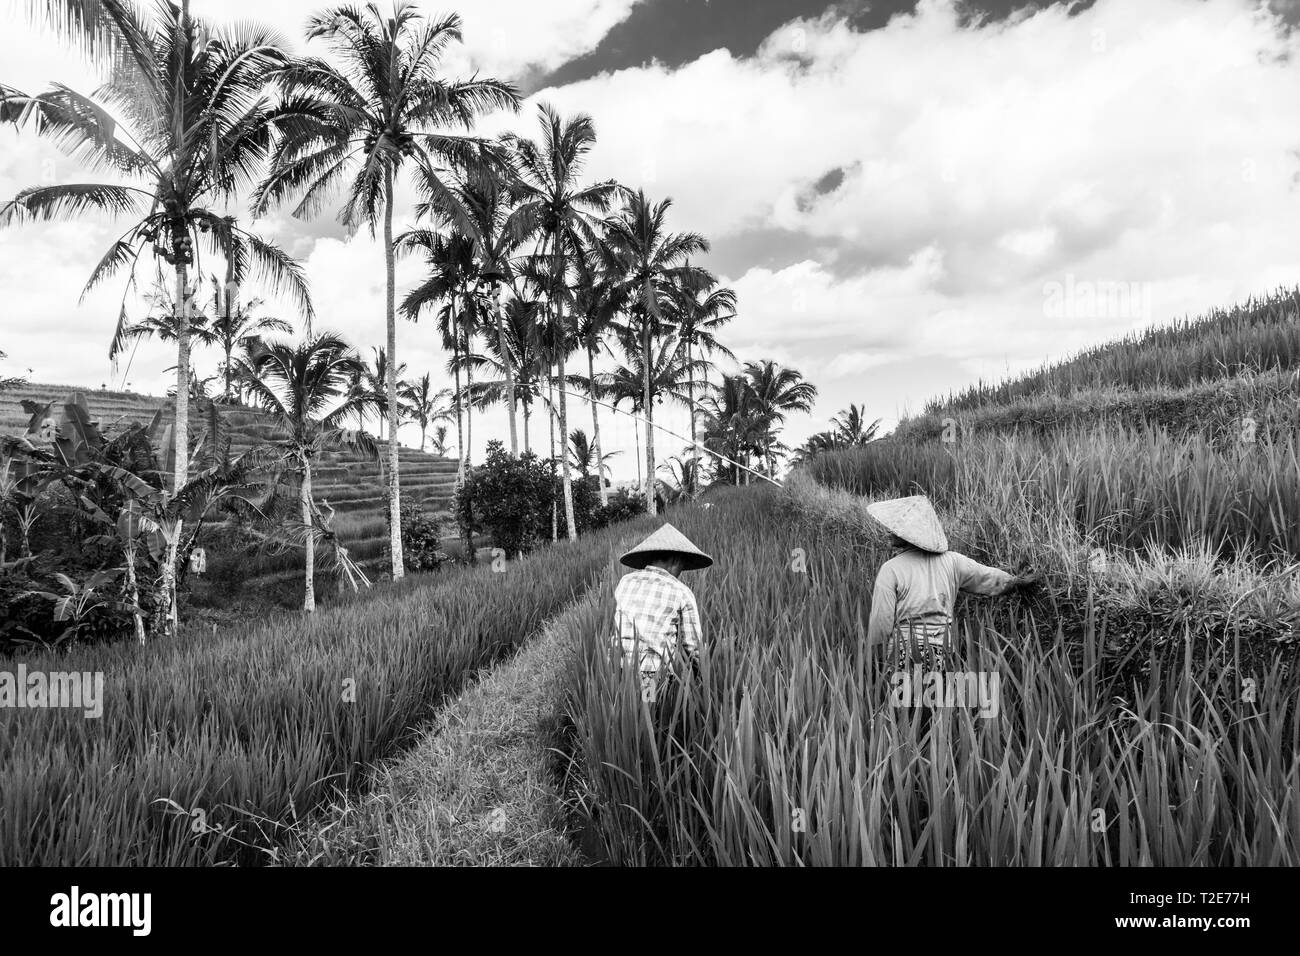 Female farmers working in beautiful Jatiluwih rice terrace plantations on Bali, Indonesia, south east Asia. Black and white image. Stock Photo